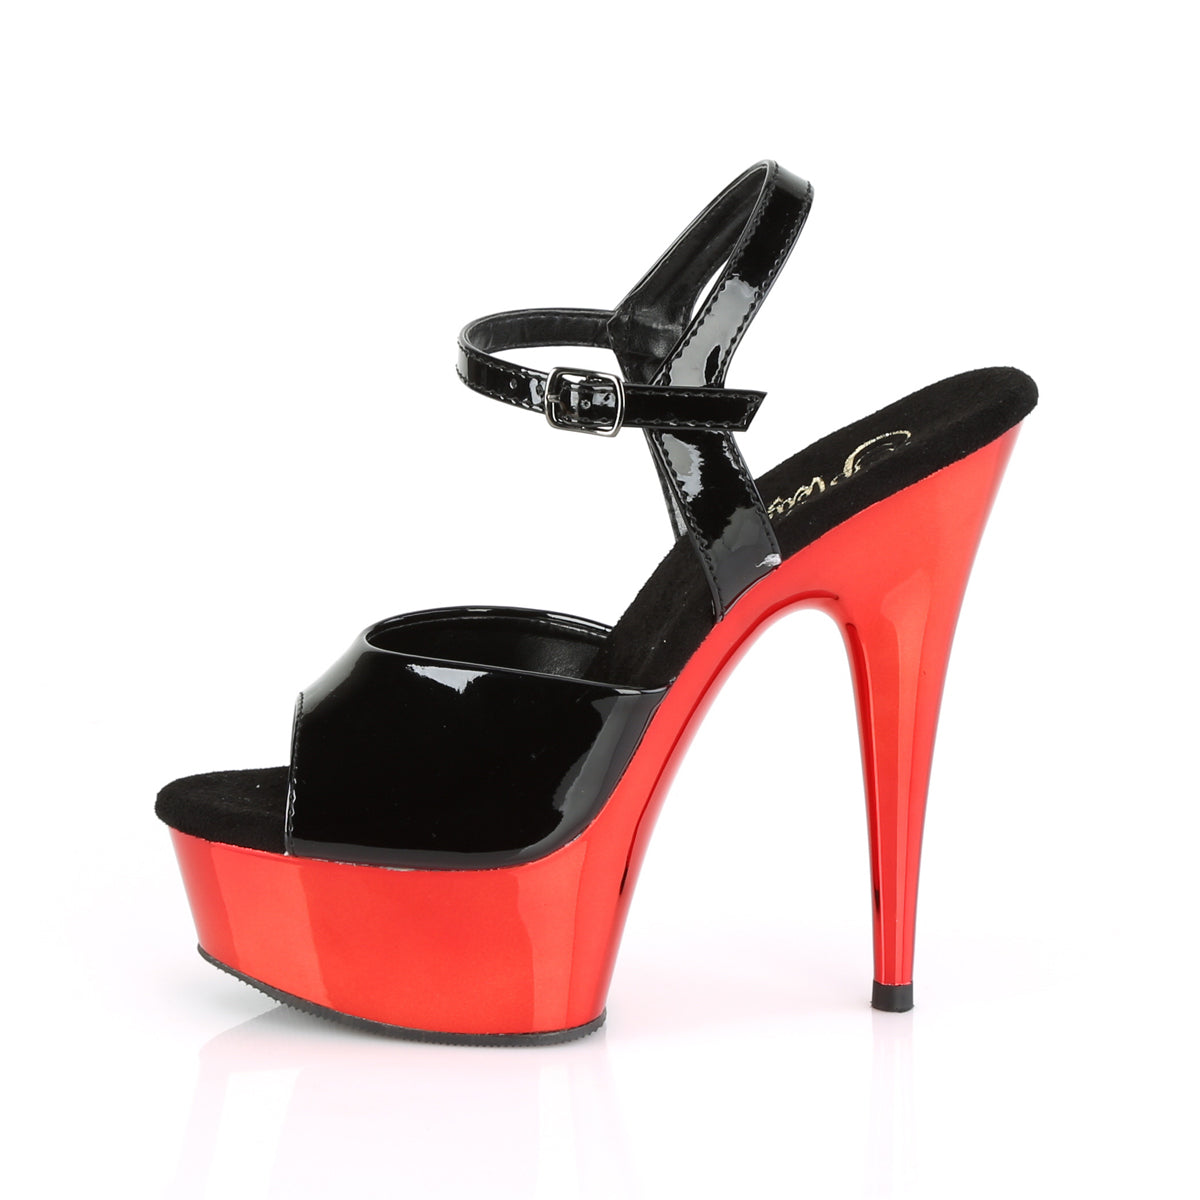 DELIGHT-609 6" Black with Red Chrome Pole Dancer Platforms-Pleaser- Sexy Shoes Pole Dance Heels